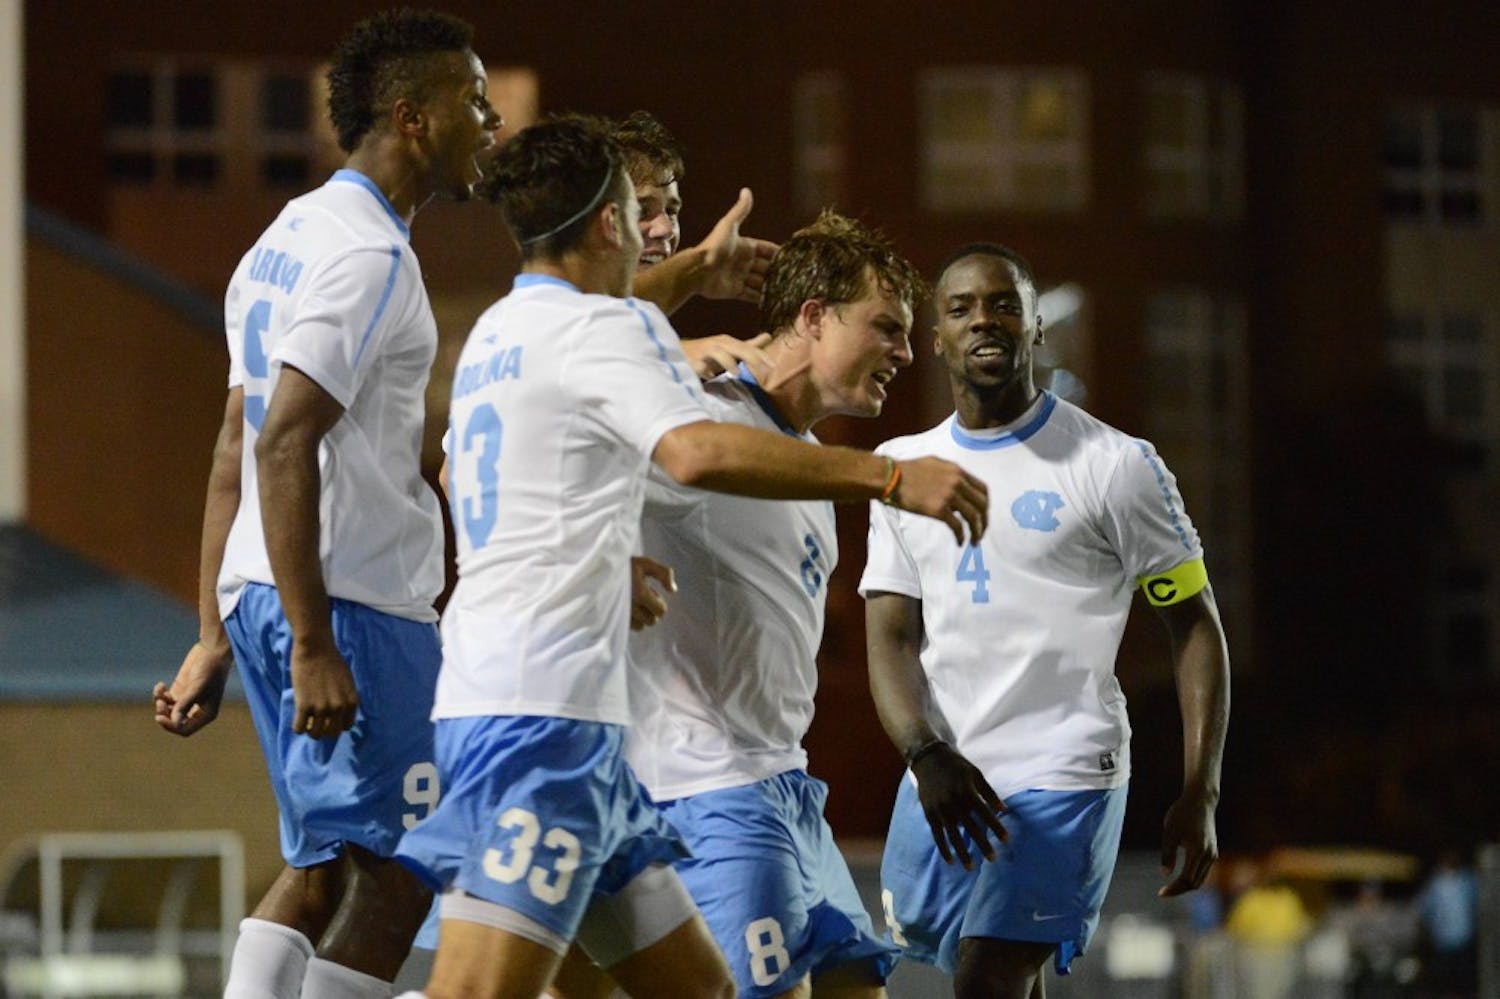 UNC forward Tyler Engel (8) celebrates with teammates after scoring the game winning goal.